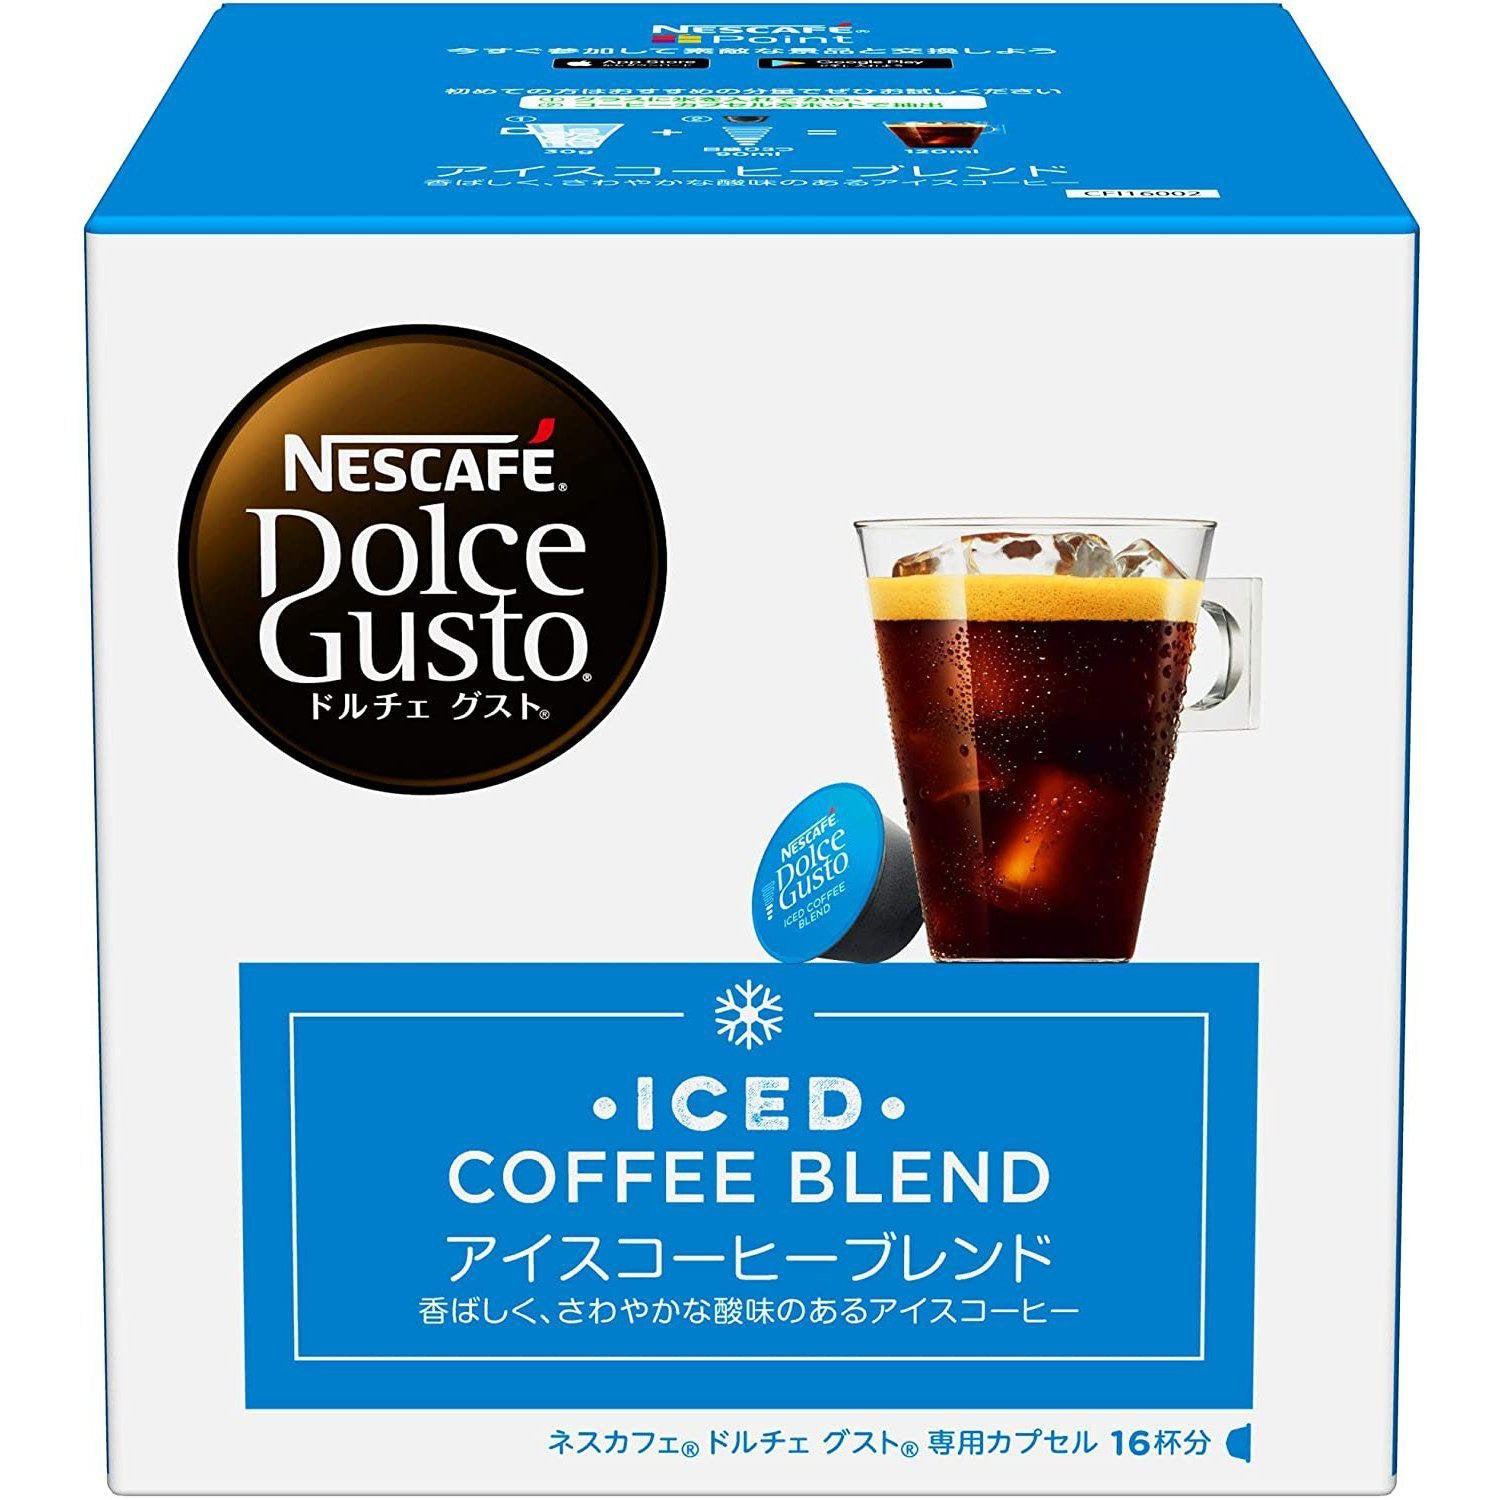 Nescafé Dolce Gusto Capsules Iced Coffee Blend 16 Pods